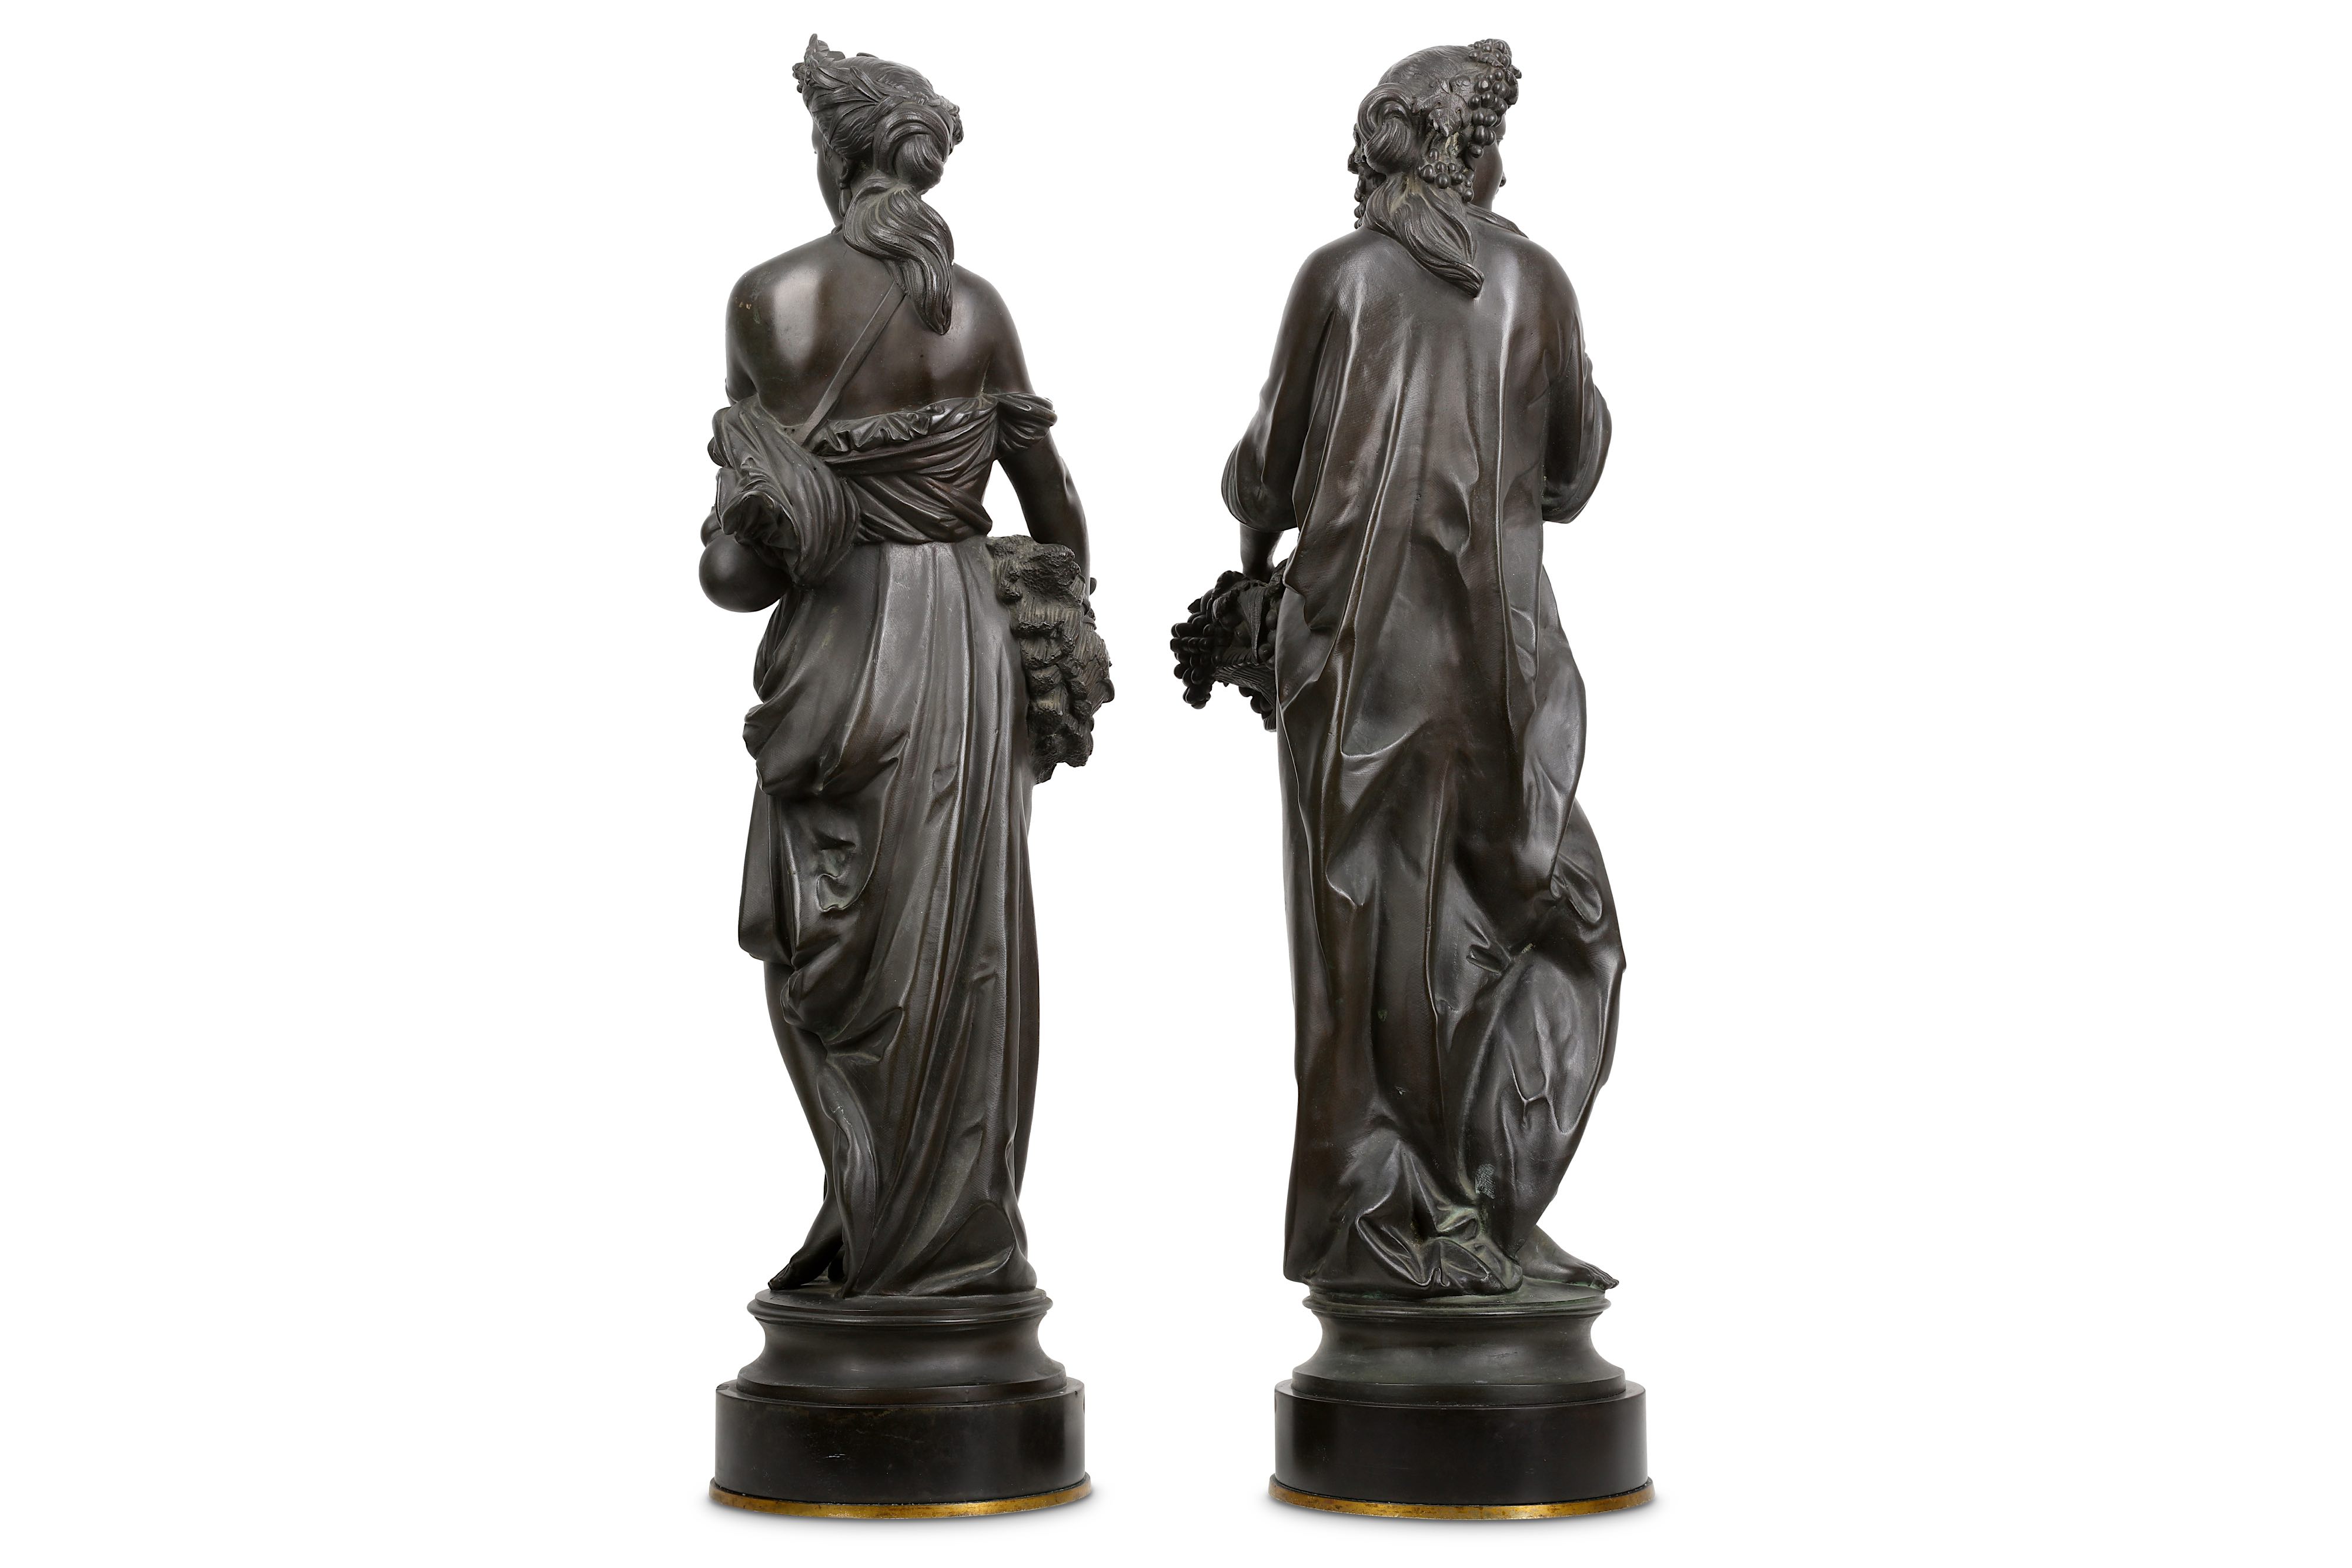 PAUL DUBOIS (FRENCH, 1829-1905): A PAIR OF BRONZE FIGURES OF MAIDENS - Image 3 of 6